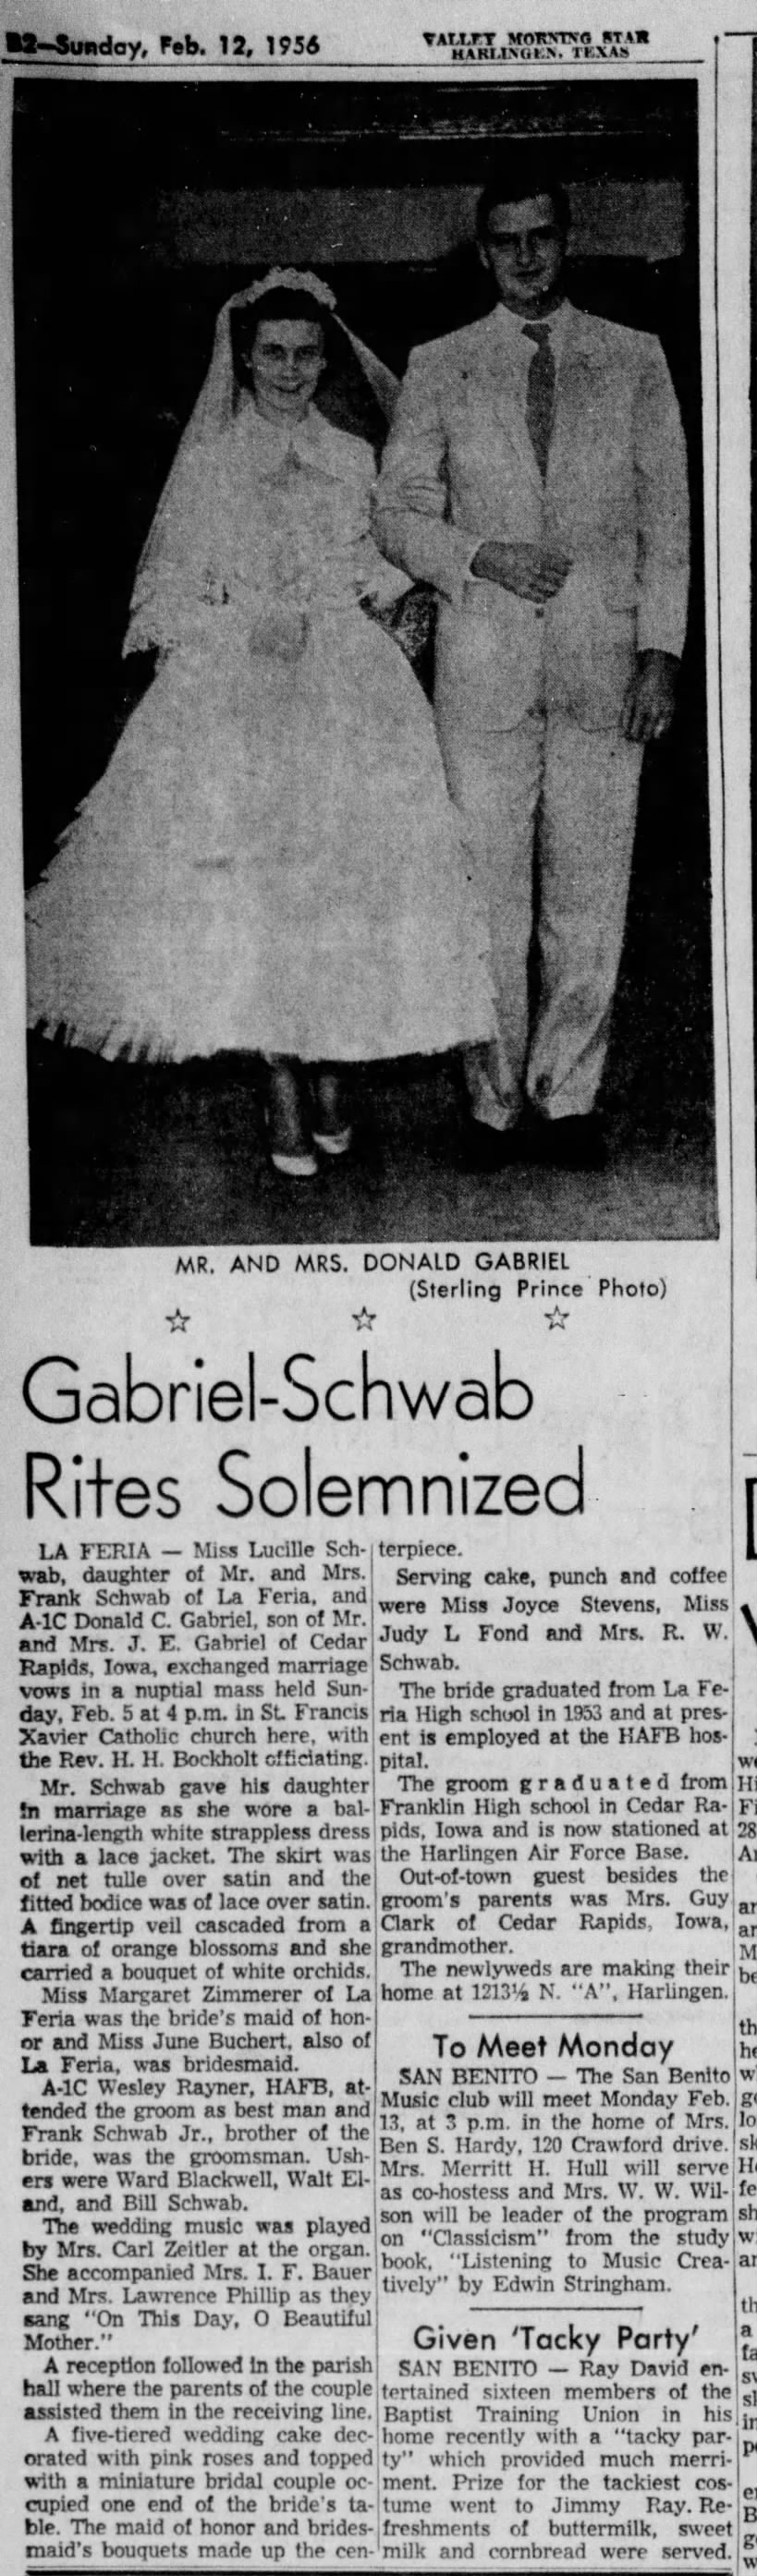 Donald C Gabriel and Lucille Schwab marriage news